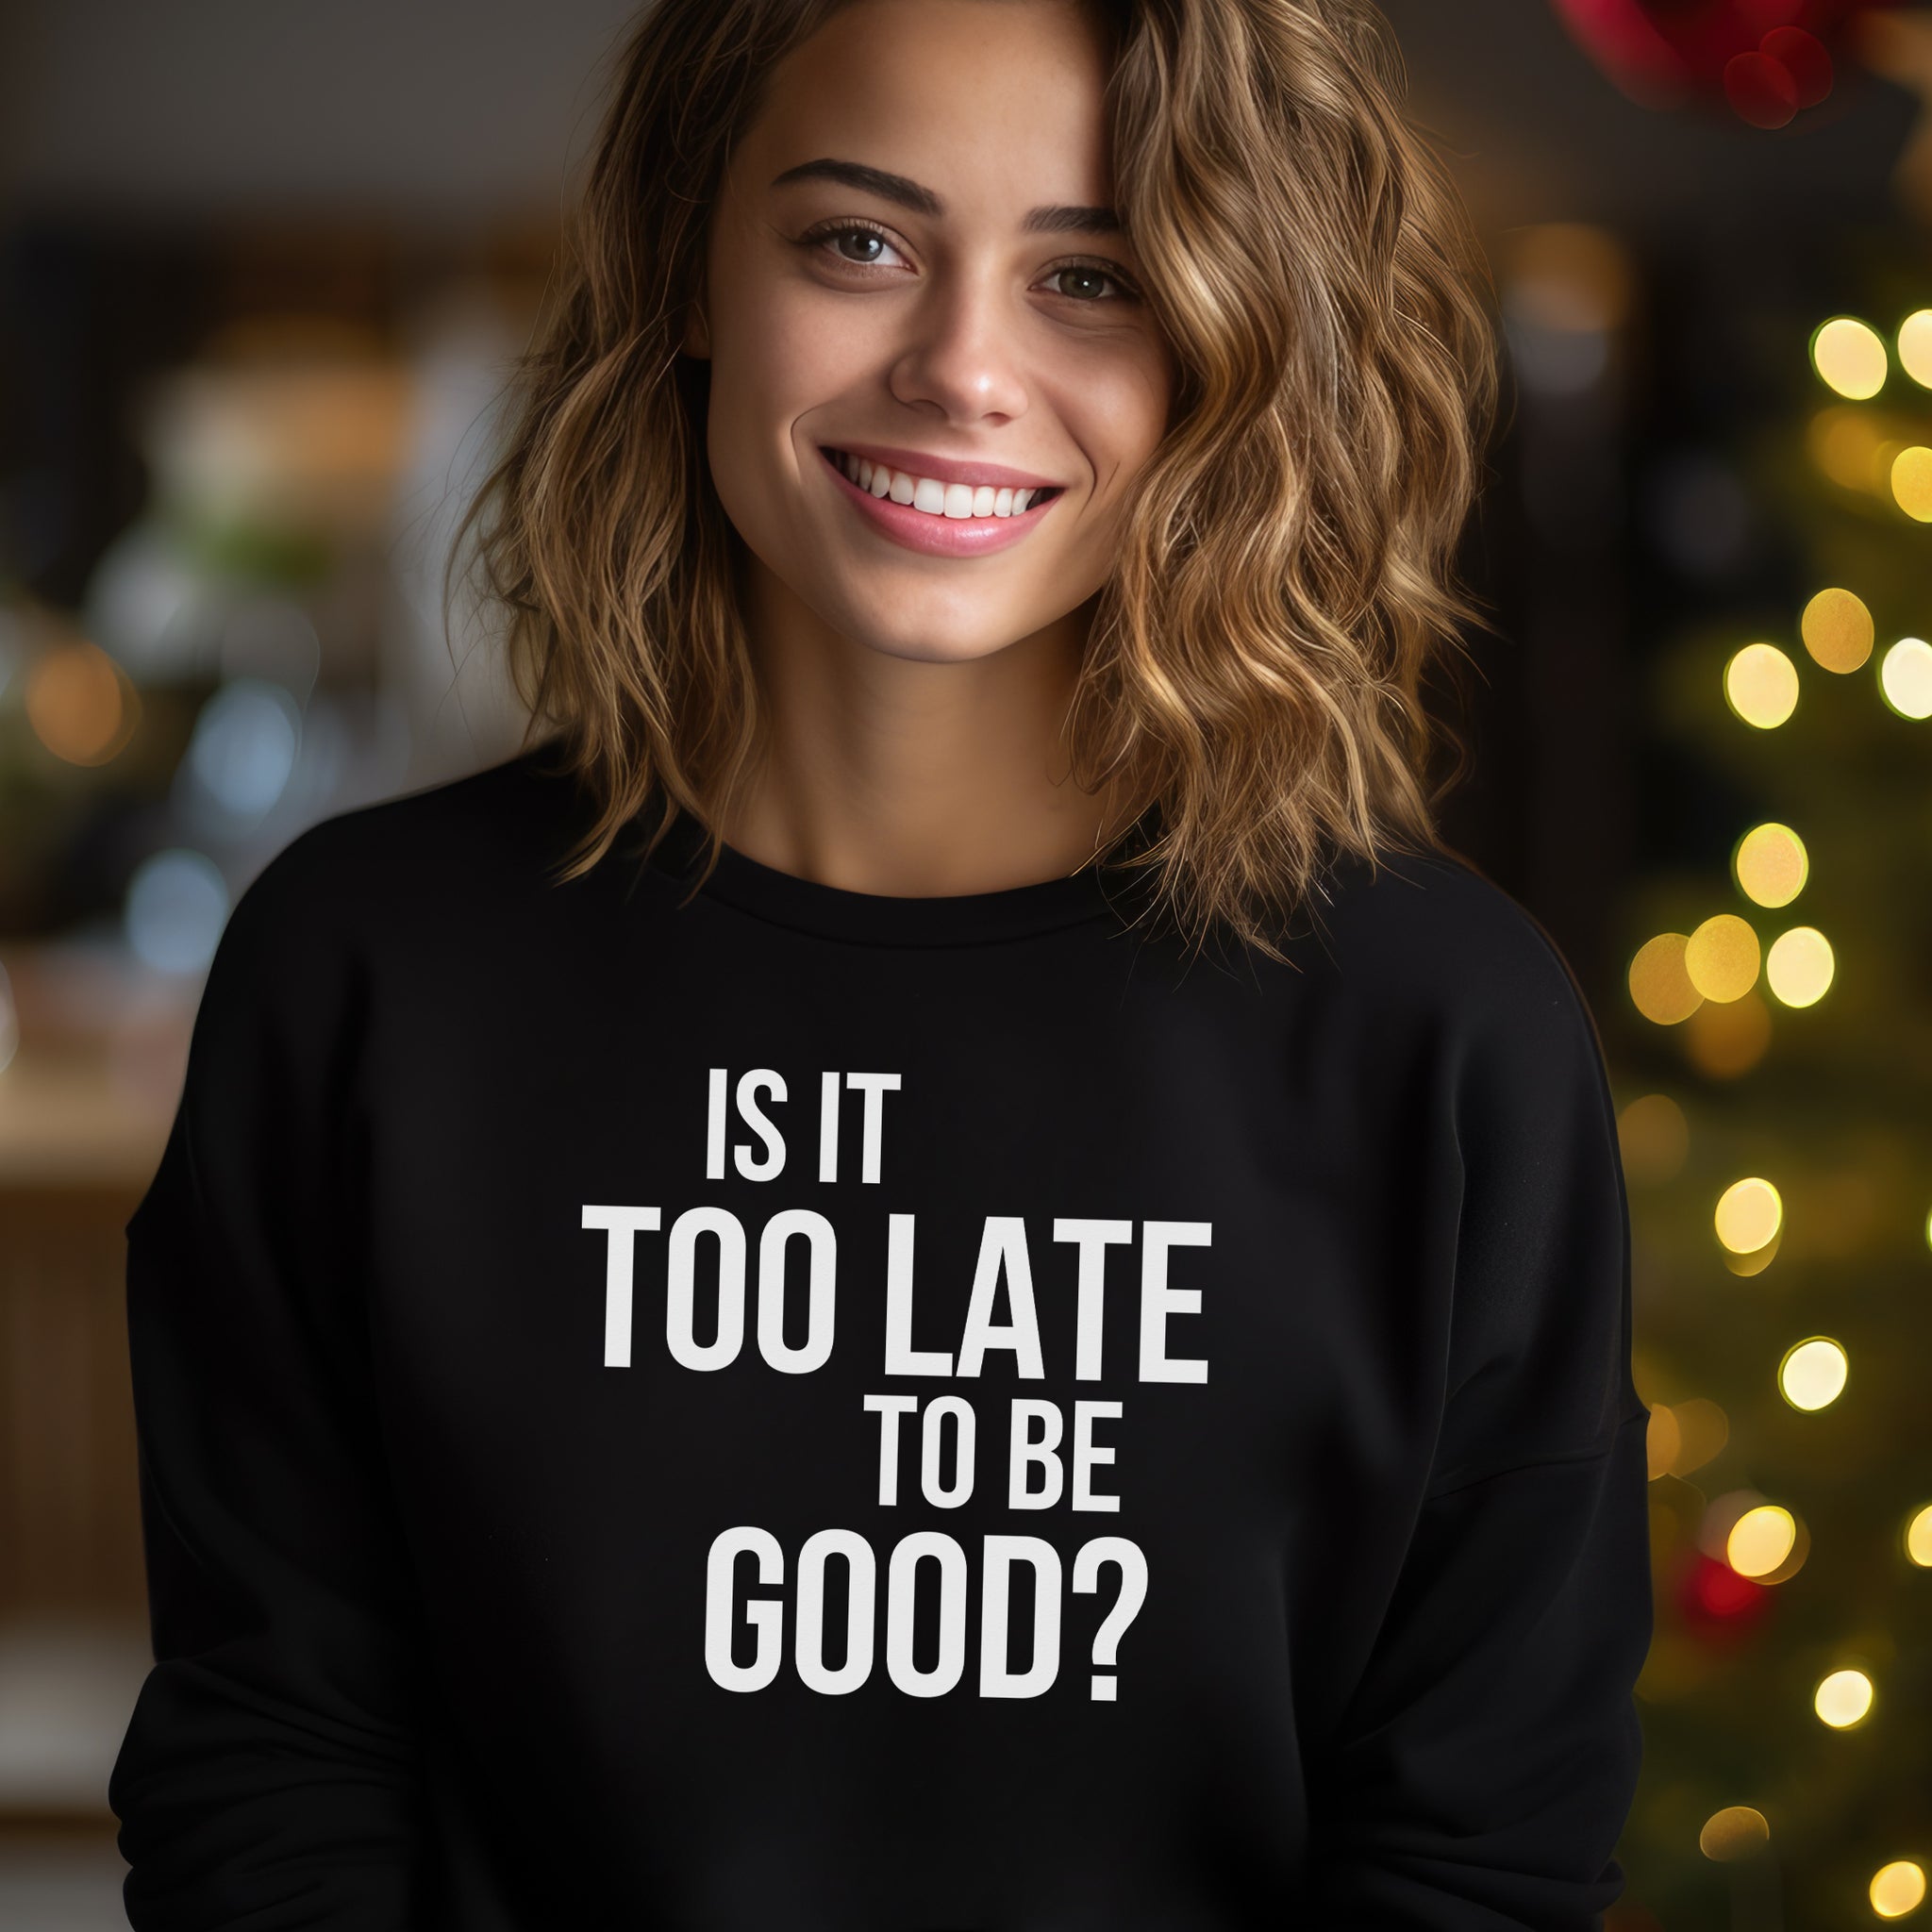 Is It Too Late To Be Good Christmas Sweater - Christmas Jumper Sweatshirt - All Sizes